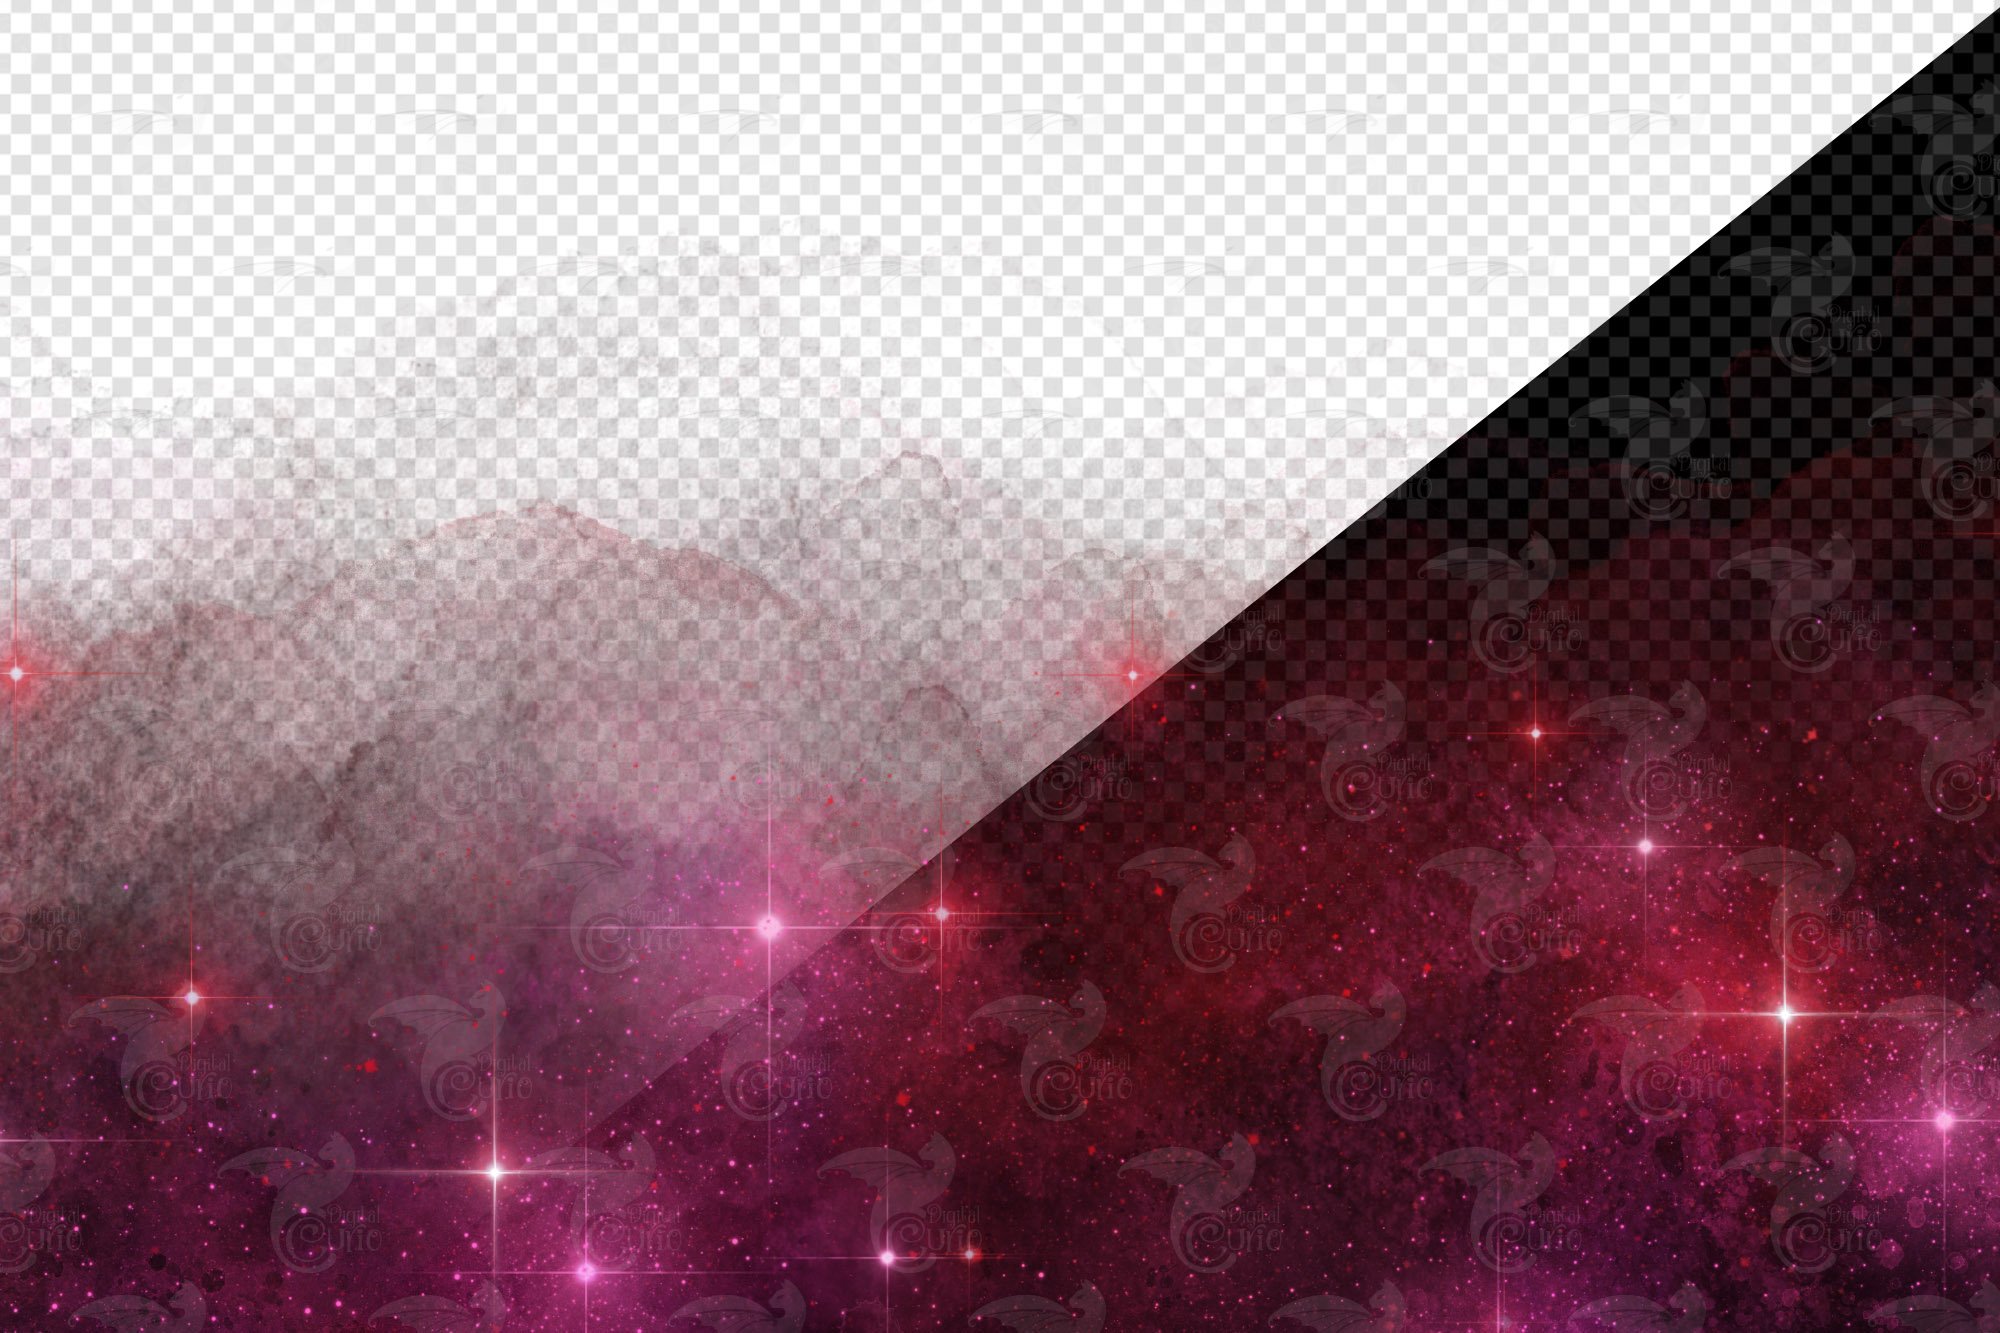 galaxy border overlays preview 4 344